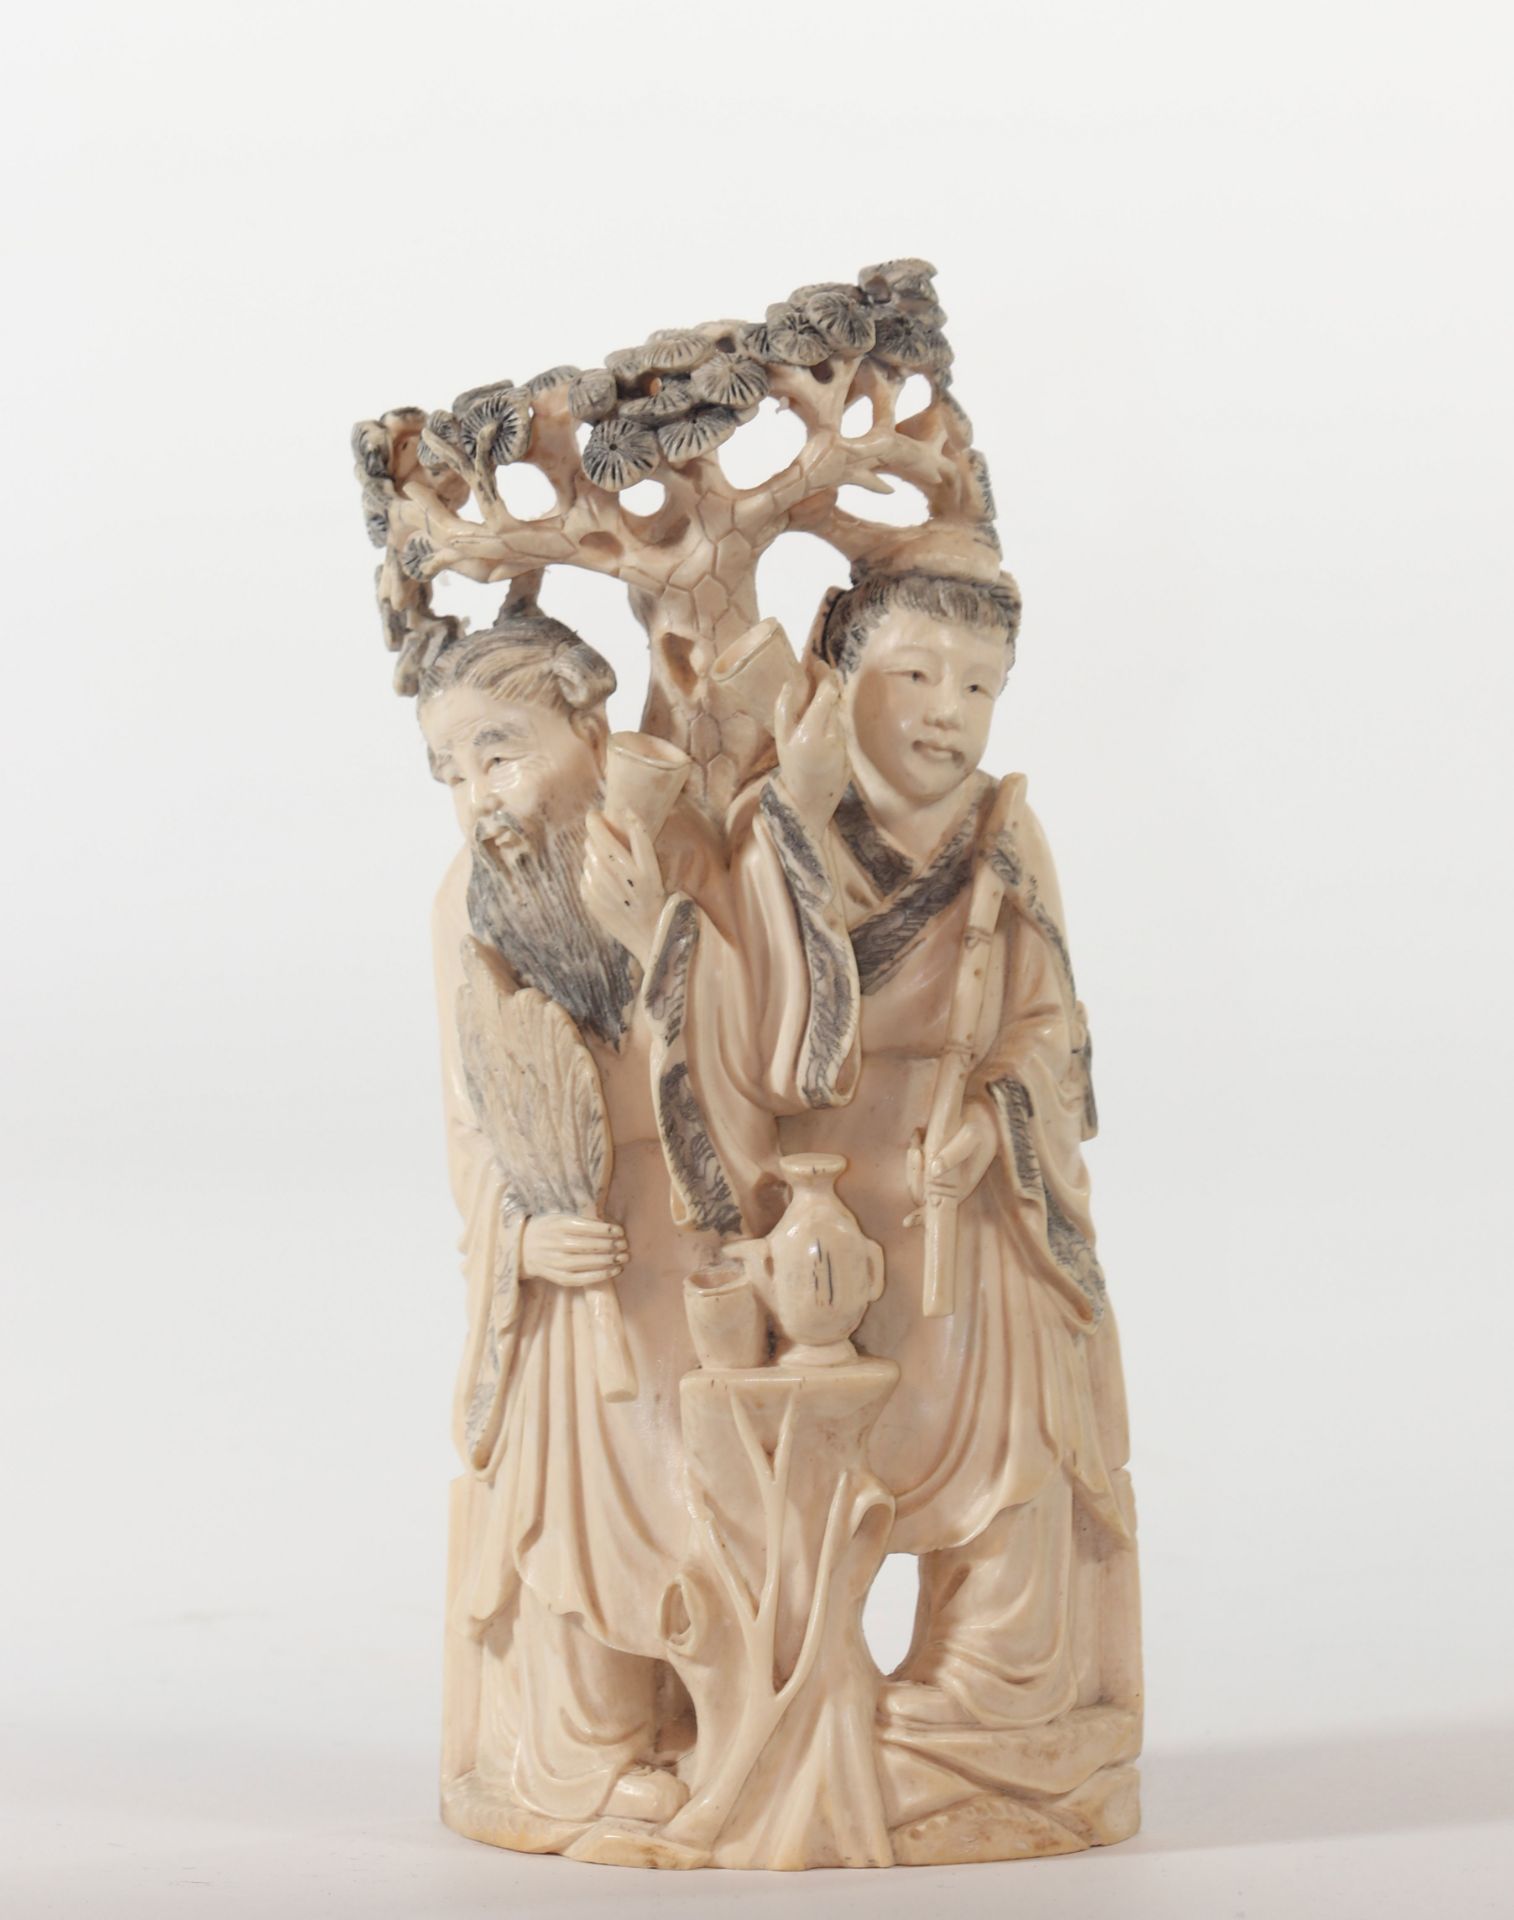 China sculpture of 3 figures early 20th century